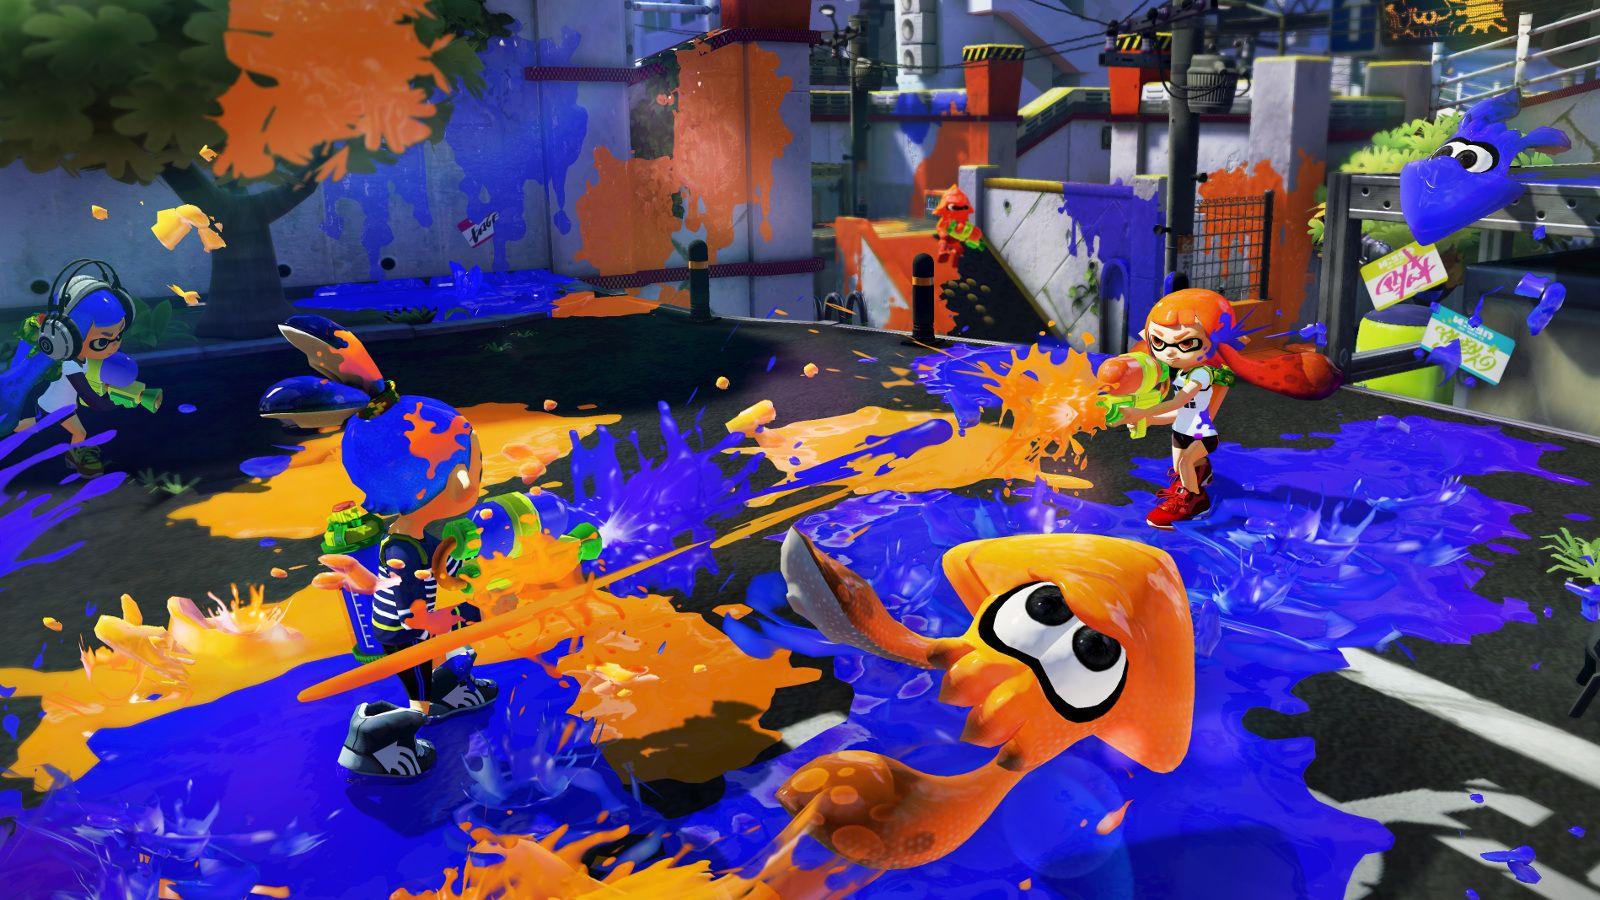 Hands On With Splatoon, Yoshi's Woolly World And More Average